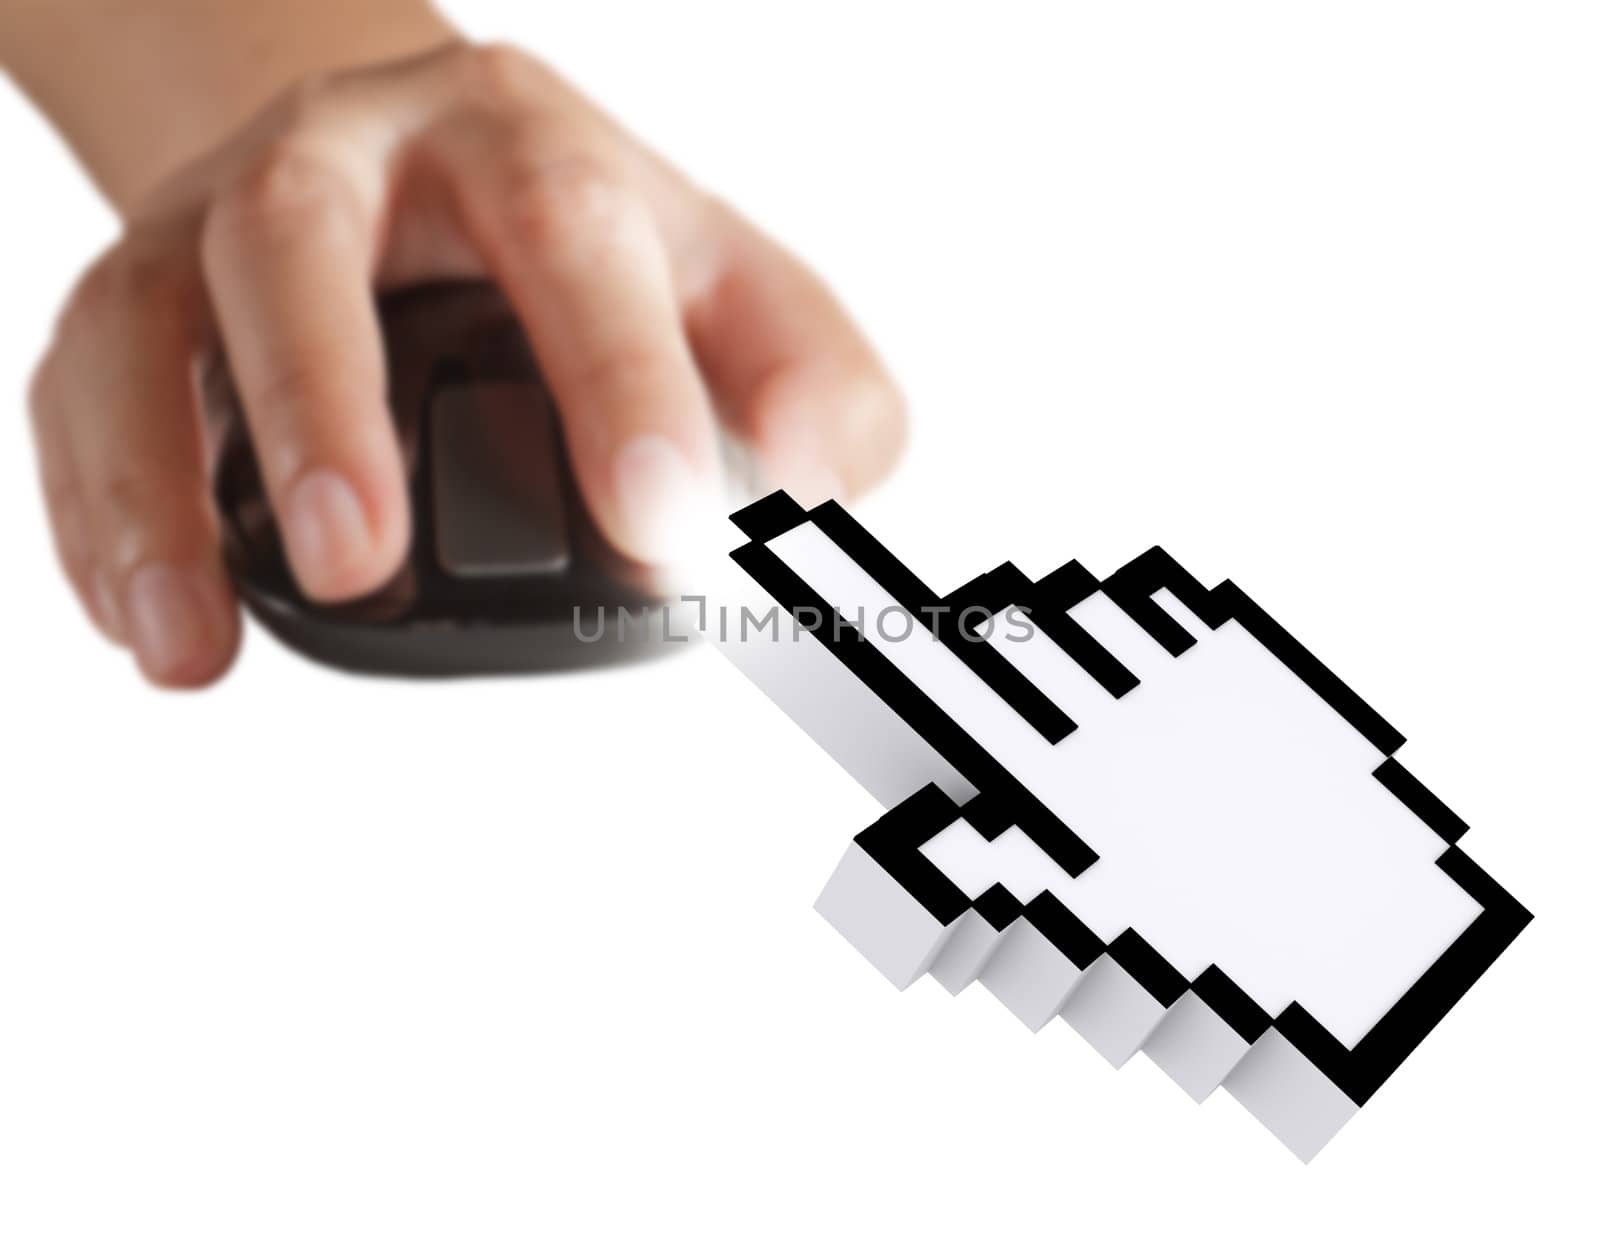 computer cursor and hand using mouse as computer concept